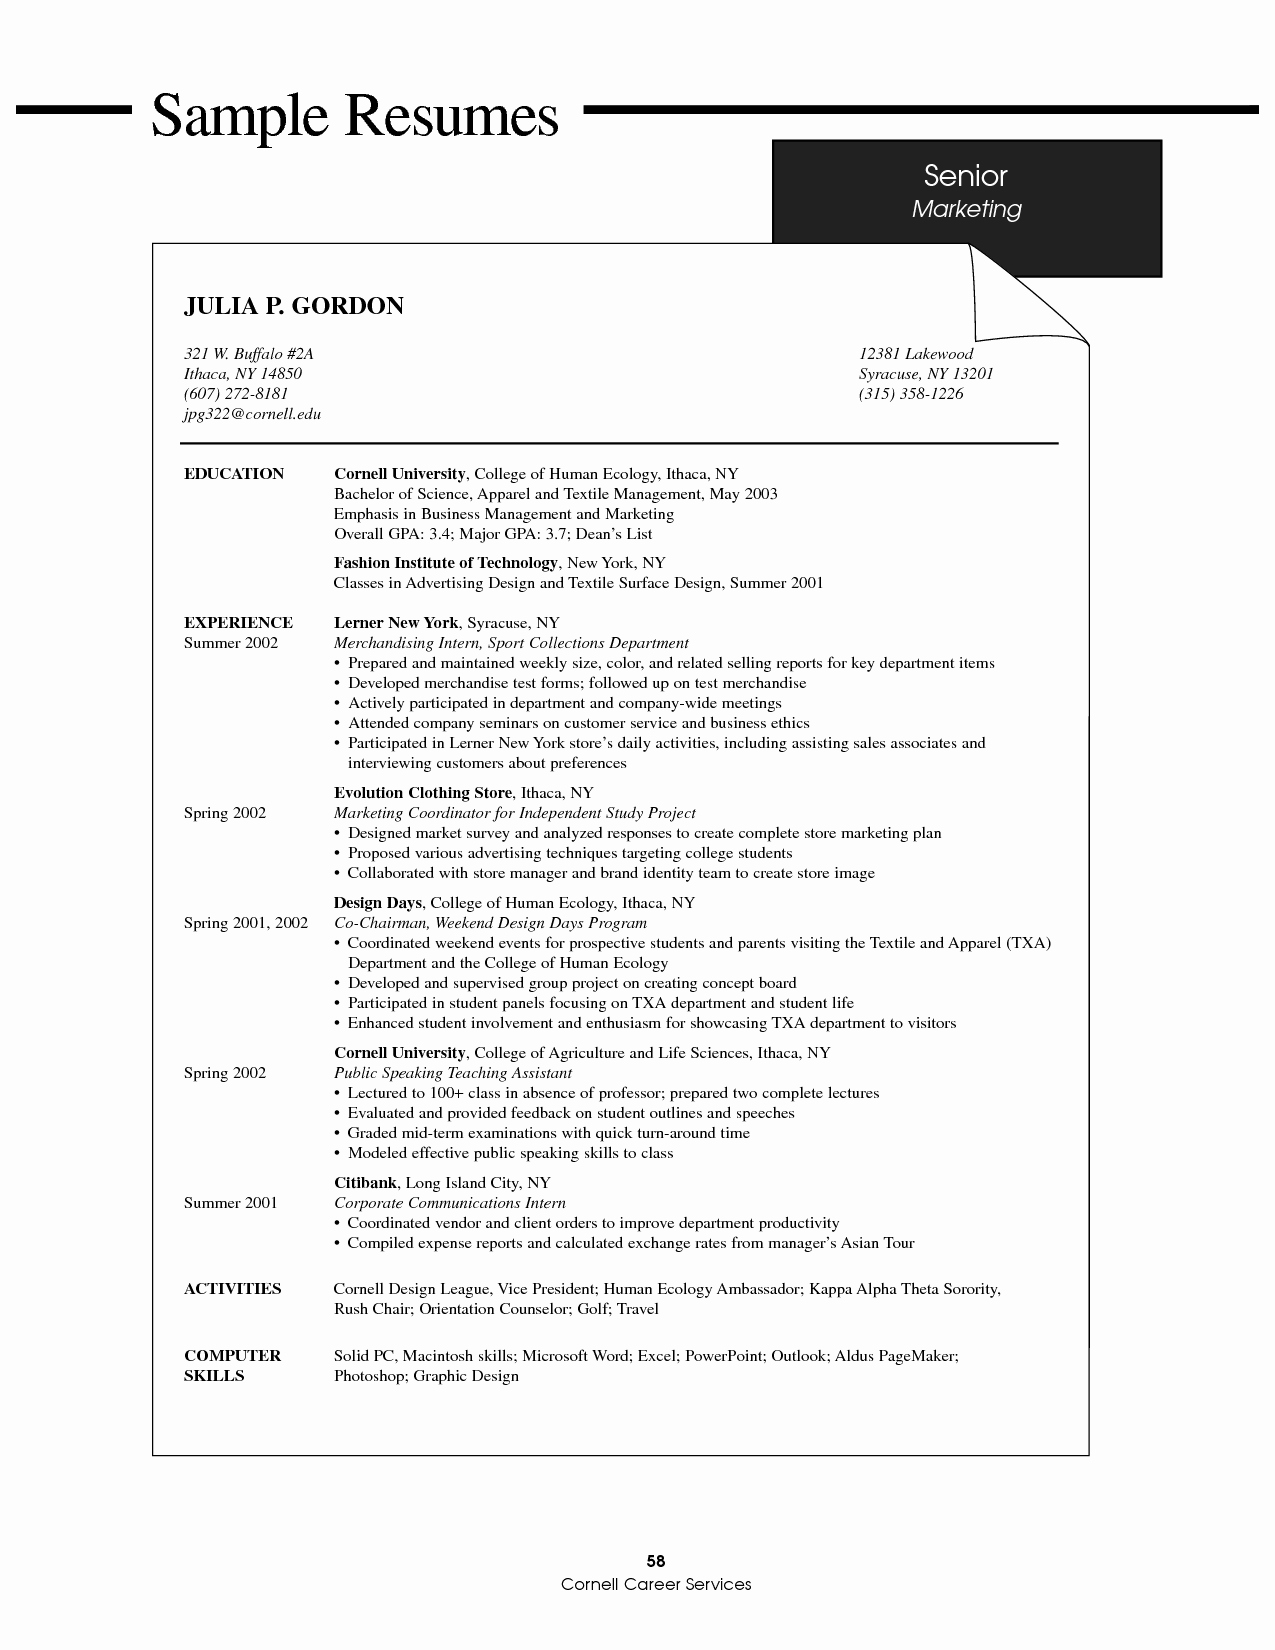 Sample College Student Resume Unique Resume Template for College Students